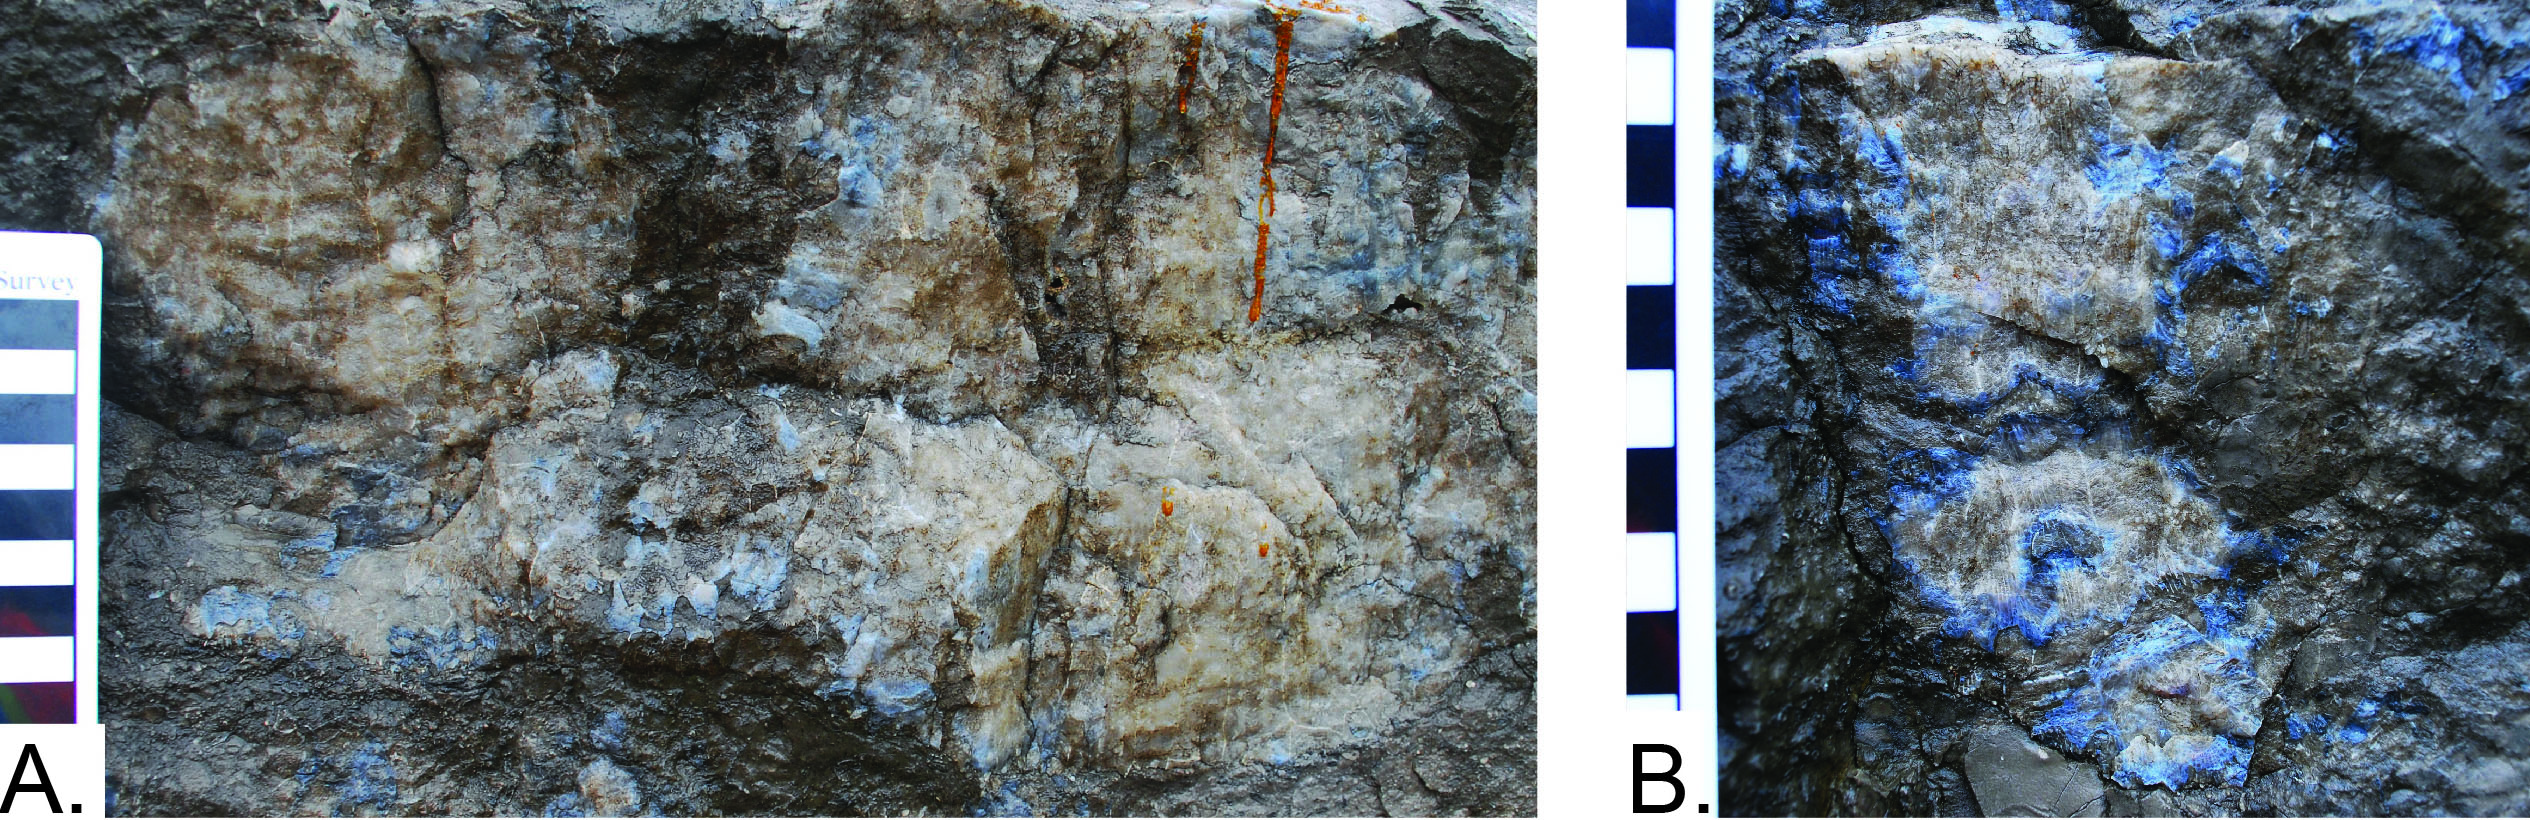 Silicified Acrocyathus floriformus mounds in outcrops of the St. Louis Limestone